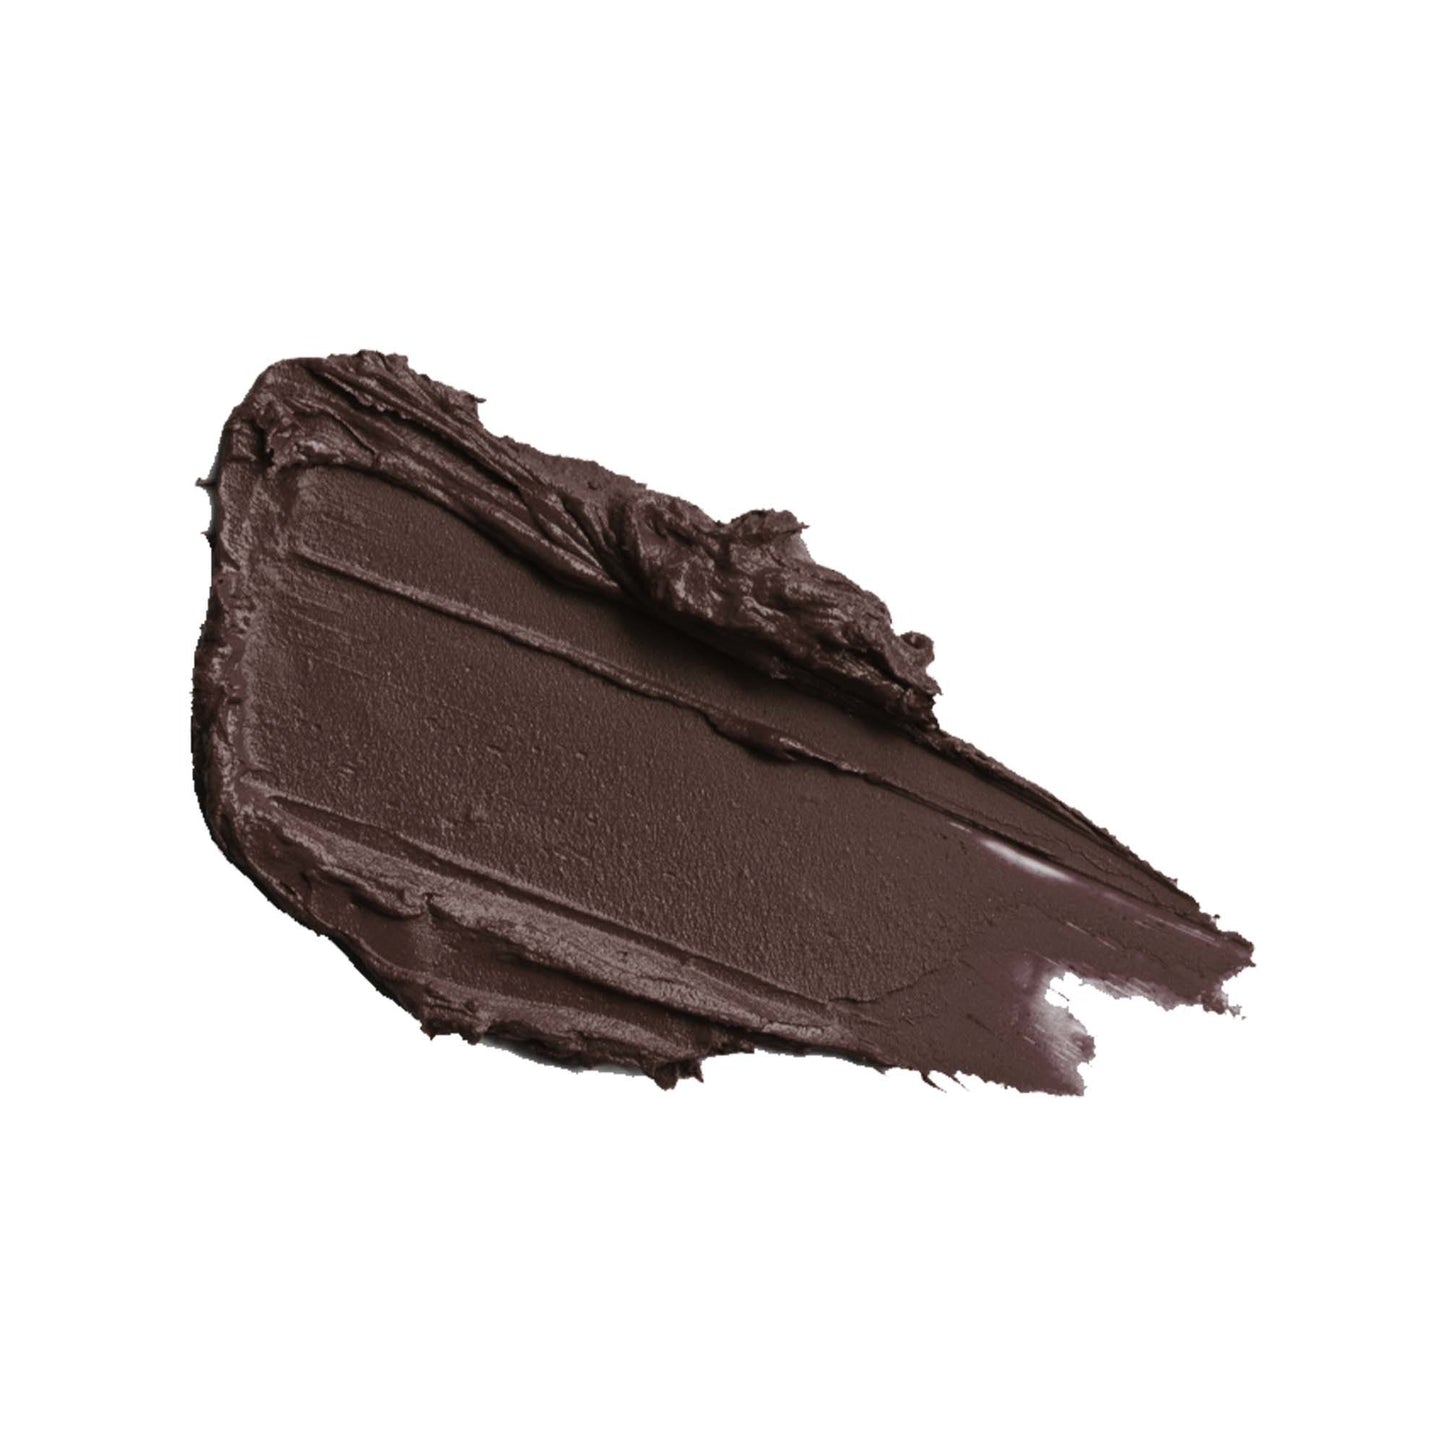 Creamade Color-Chocolate - Medium Brown swatch on a white background